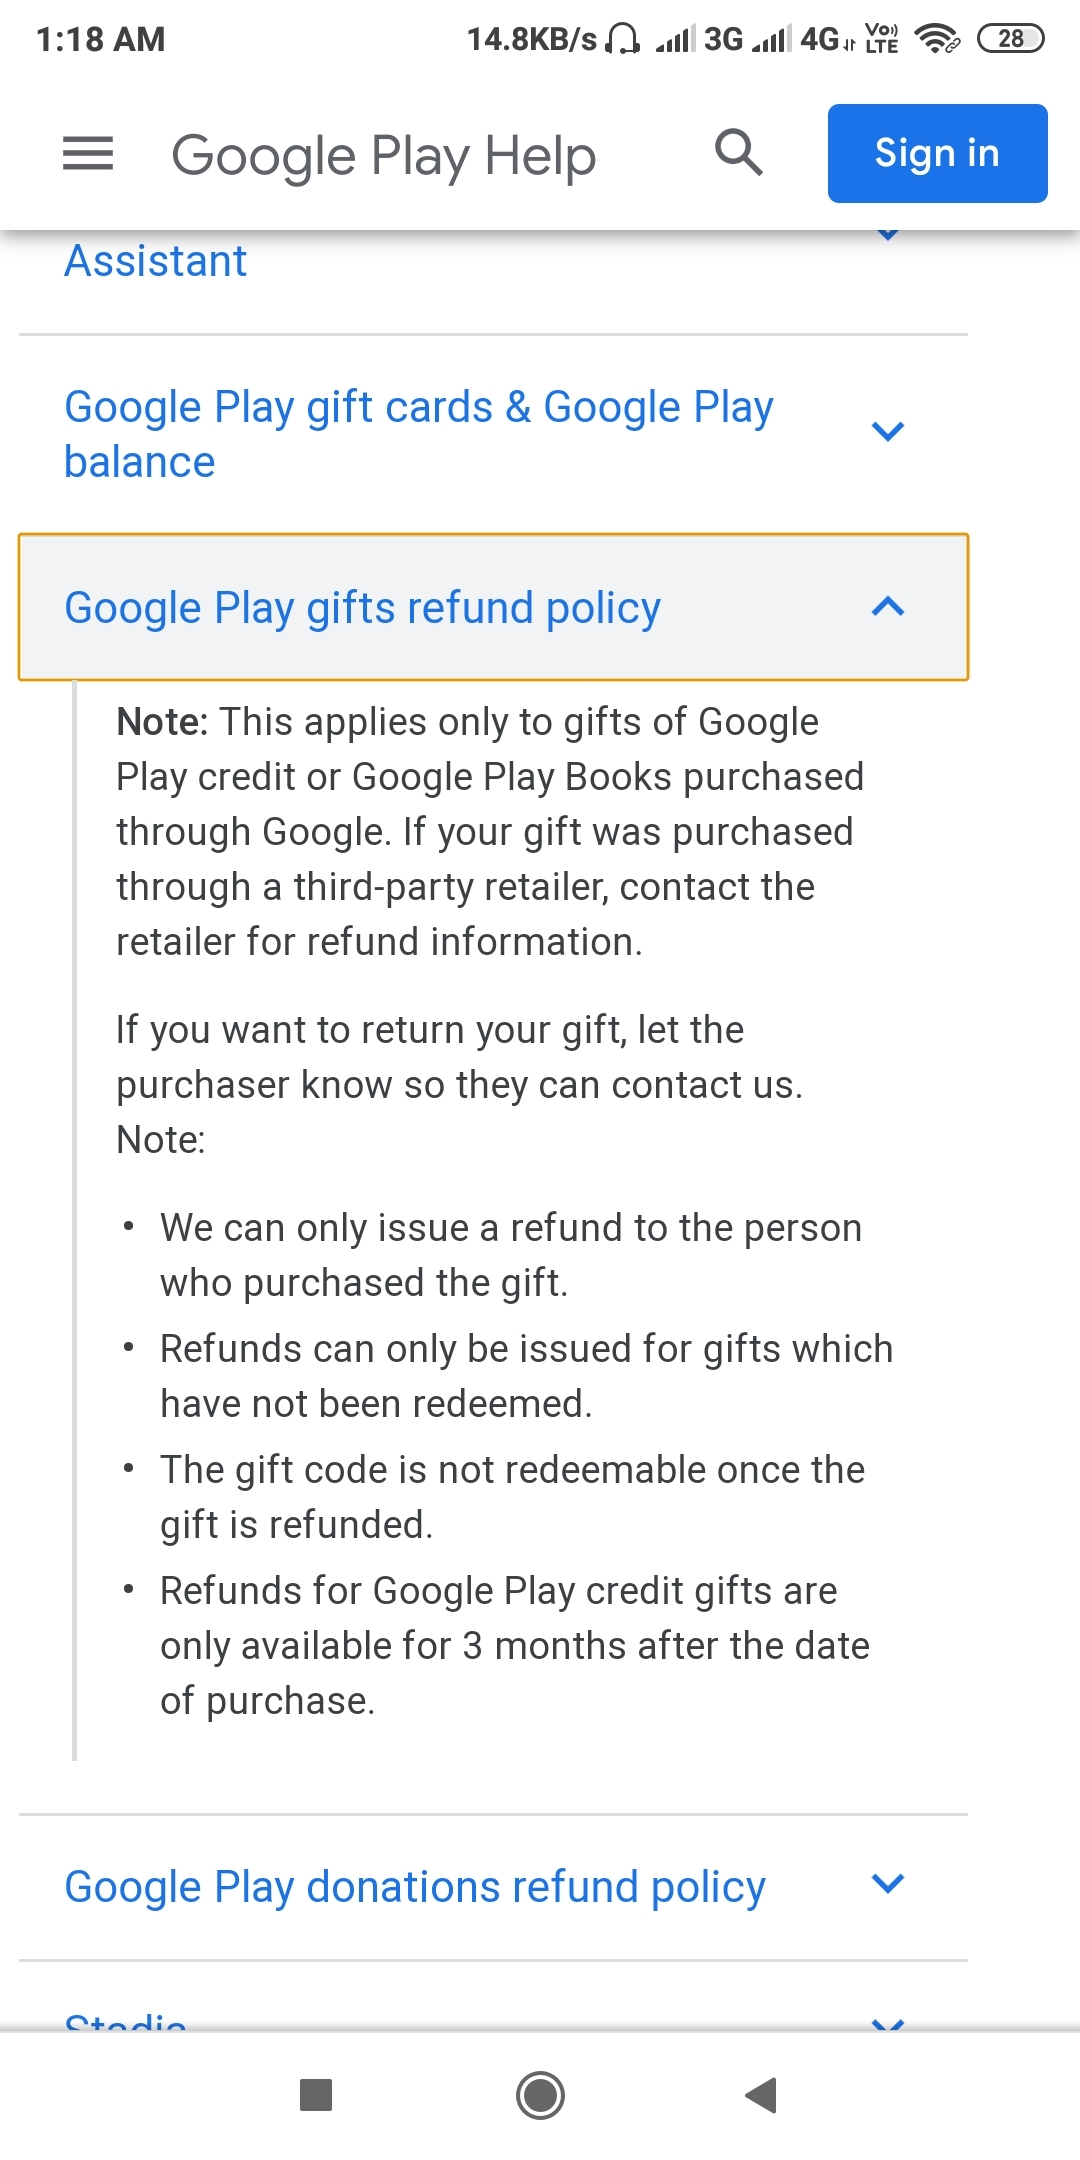 Learn about refunds on Google Play - Google Play Help